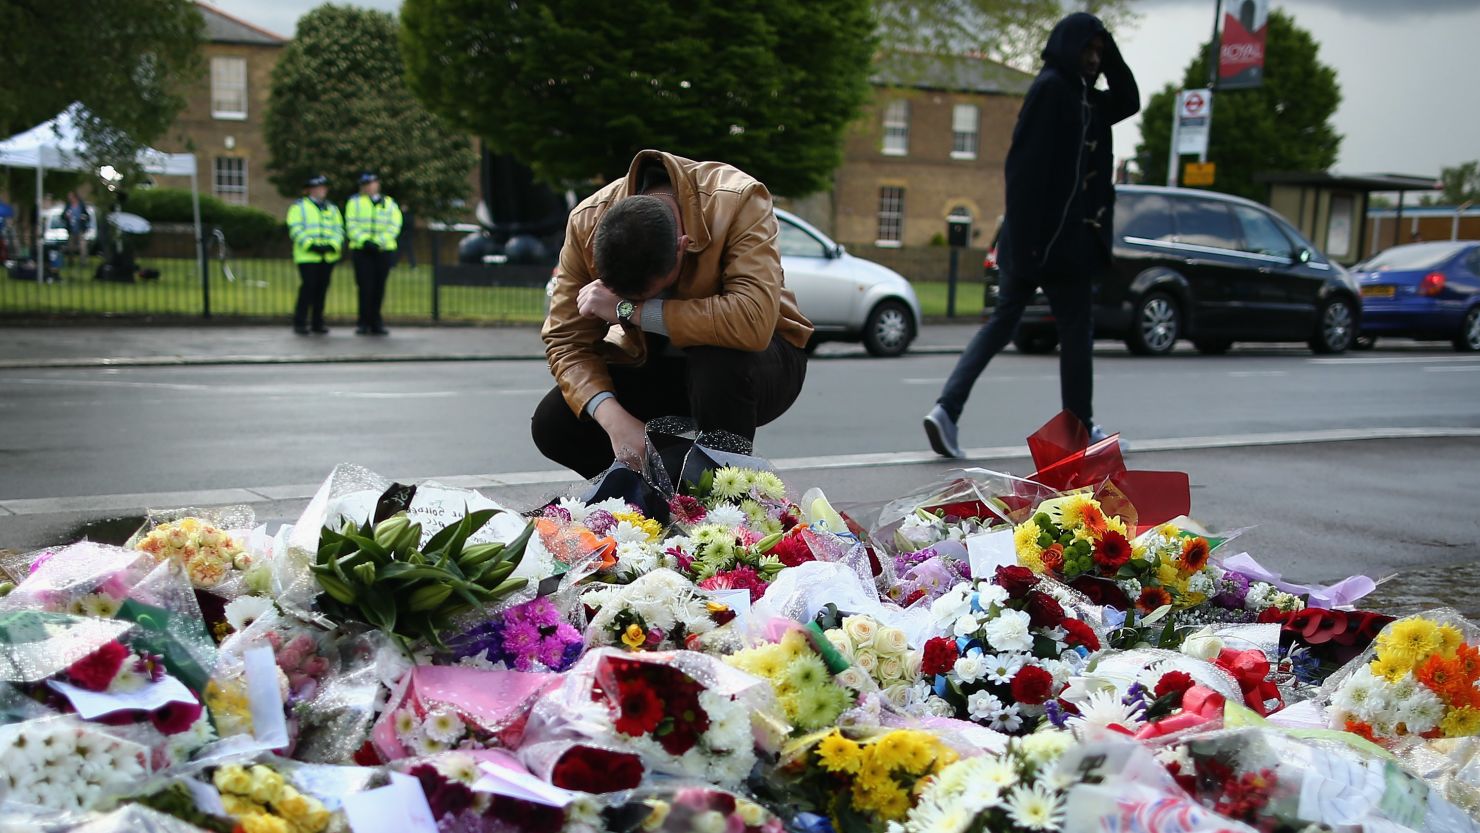 A man contemplates the scene where a British soldier was murdered in Woolwich, London; flowers have been laid in the street.